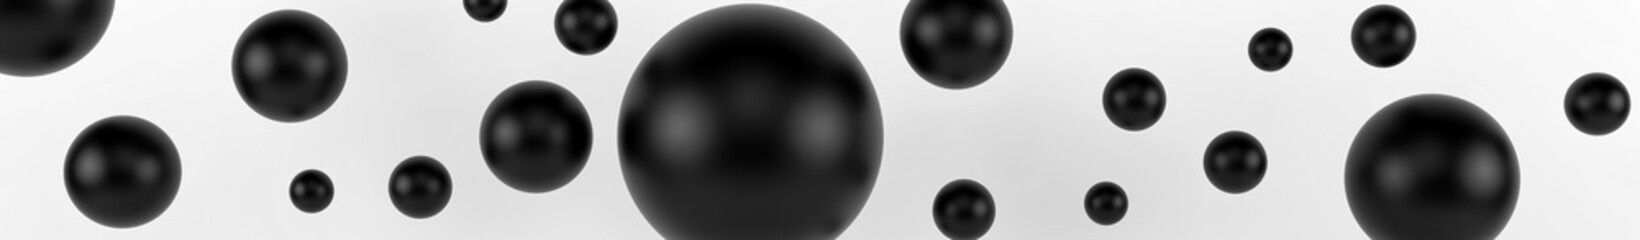 Closeup top view group of assorted industrial ceramic black balls on white background. 3d render